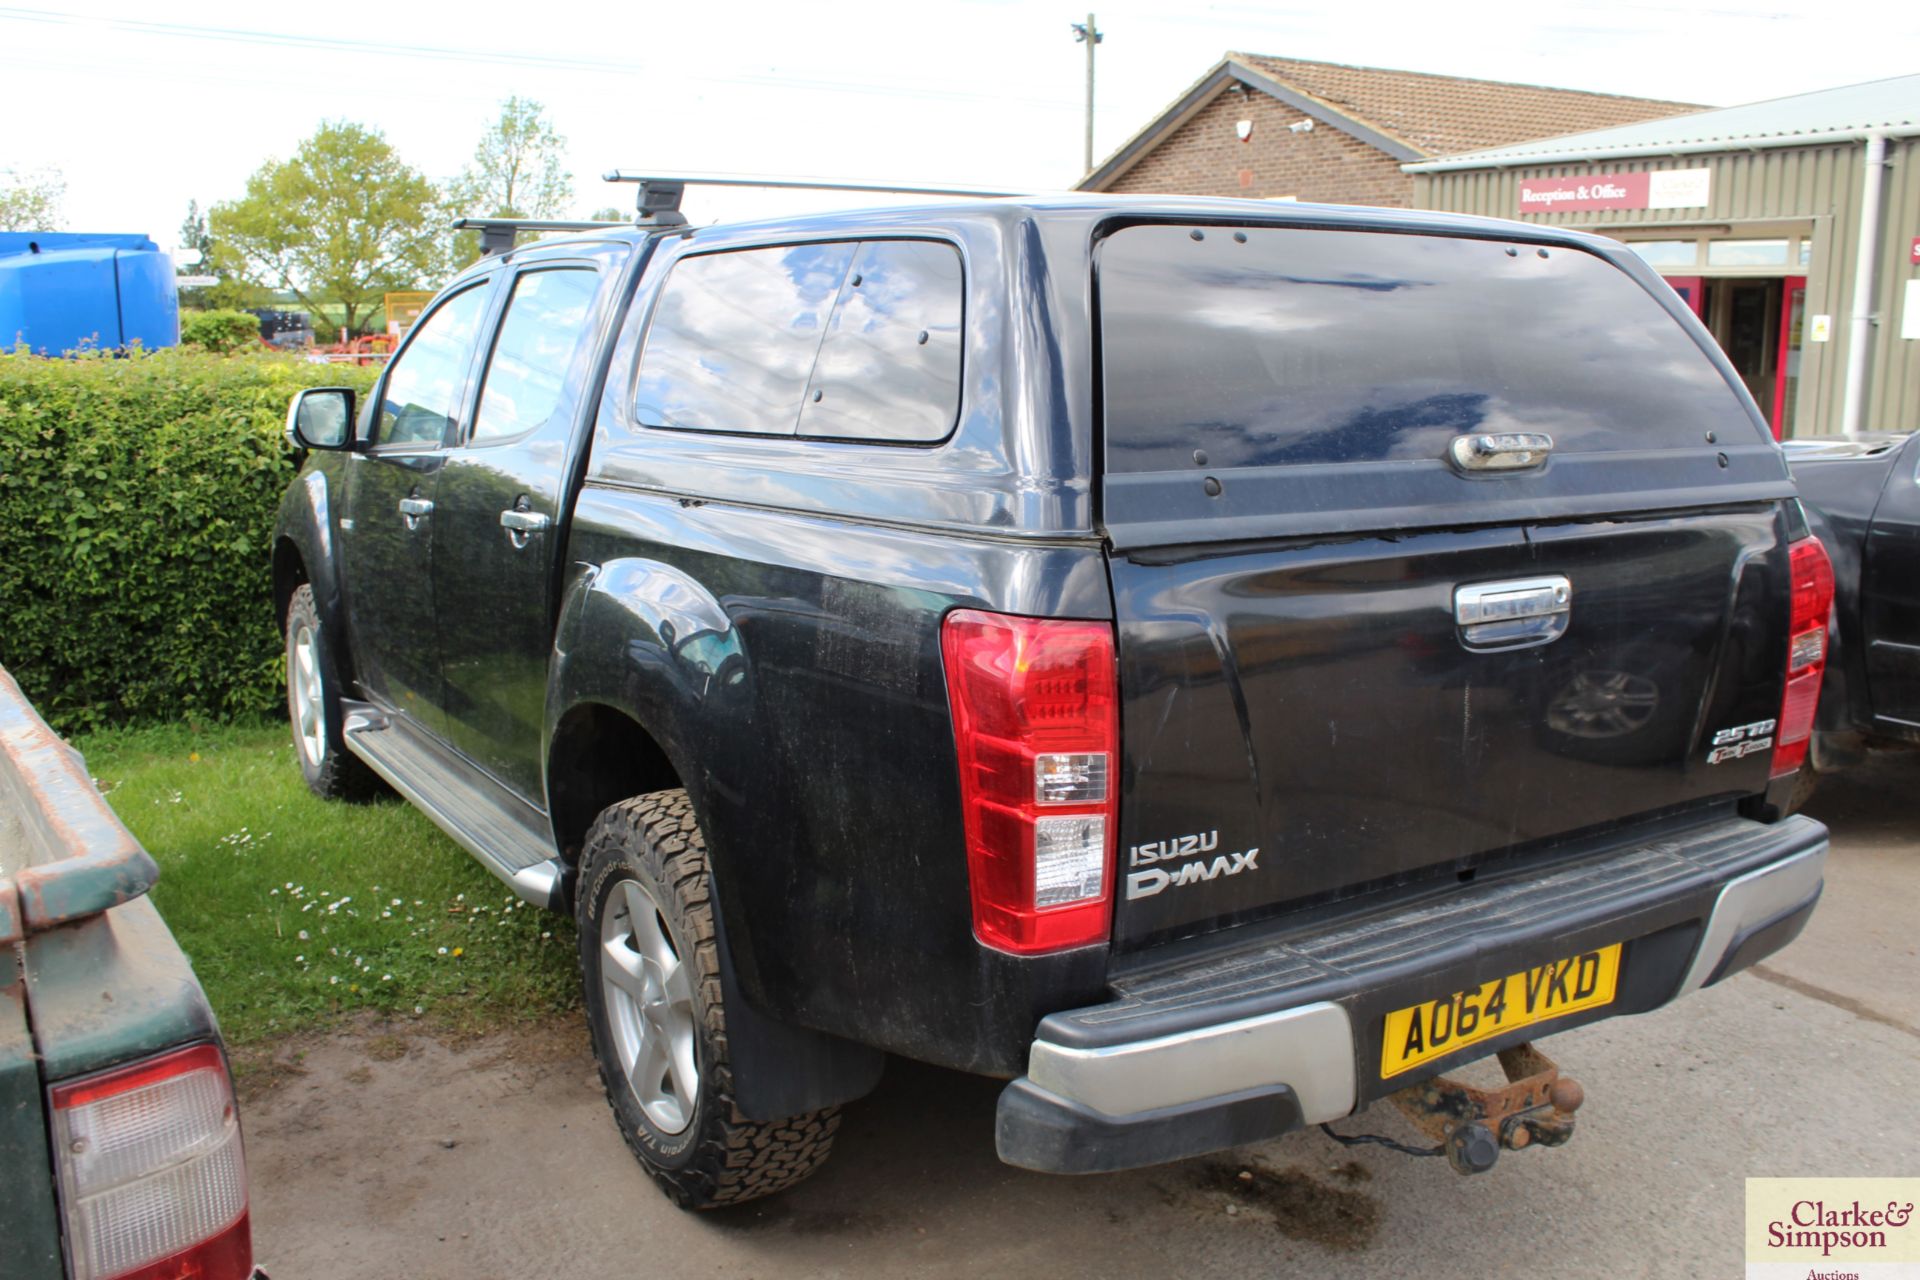 Isuzu D-Max 2.5L double cab pick-up. Registration AO64 VKD. Date of first registration 23/01/2015. - Image 4 of 12